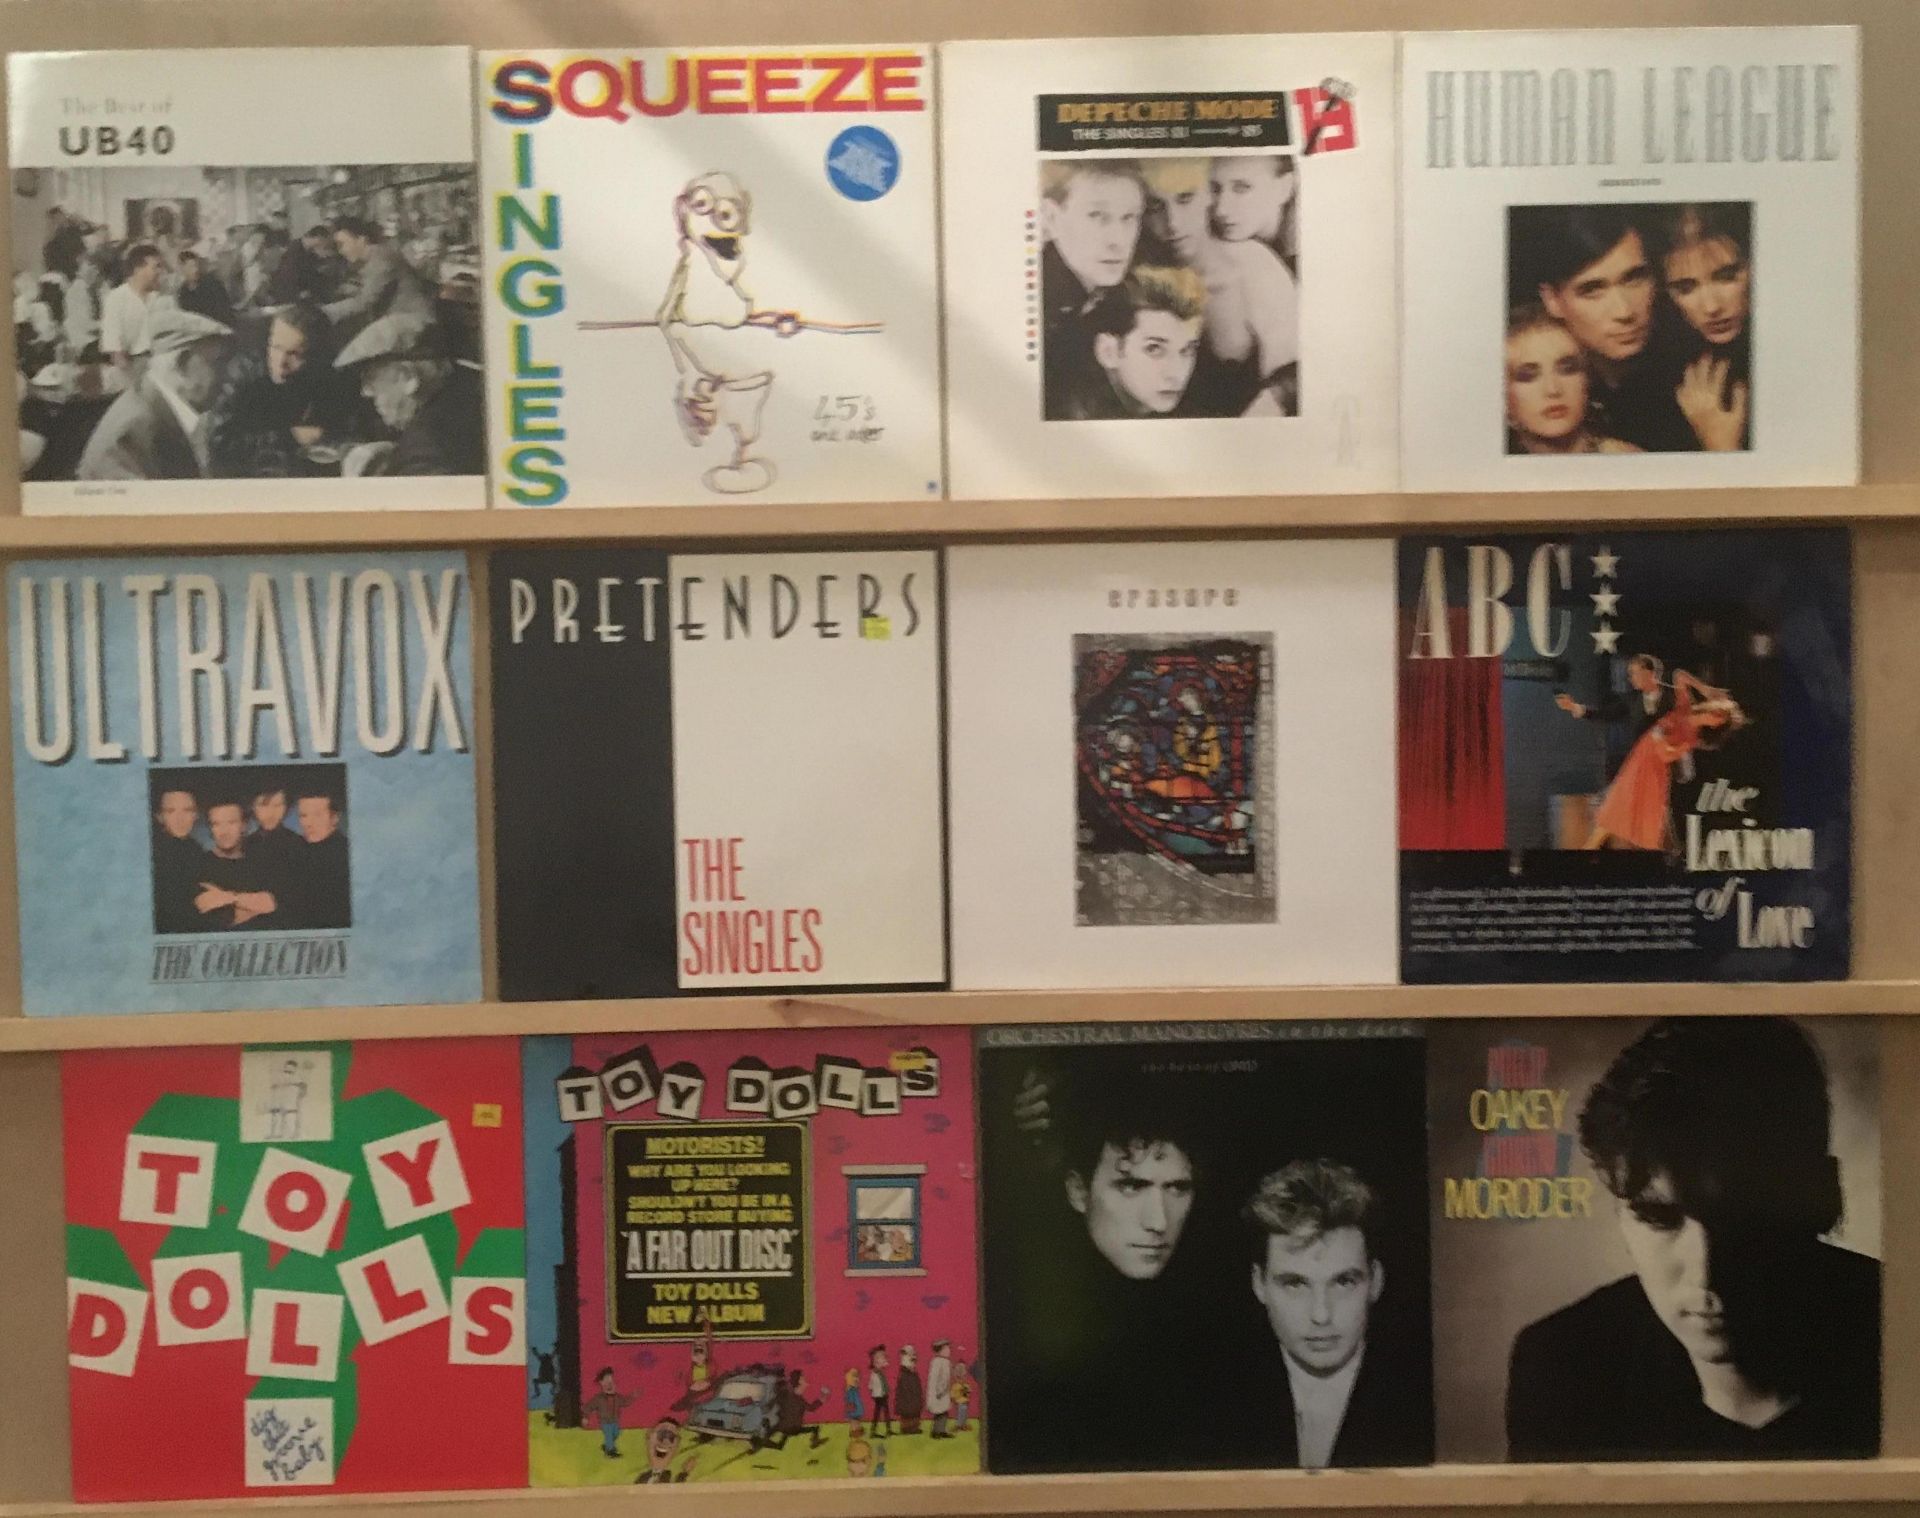 12 New Wave LPs, Toy Dolls (2), Orchestral Manoeuvres in the Dark,